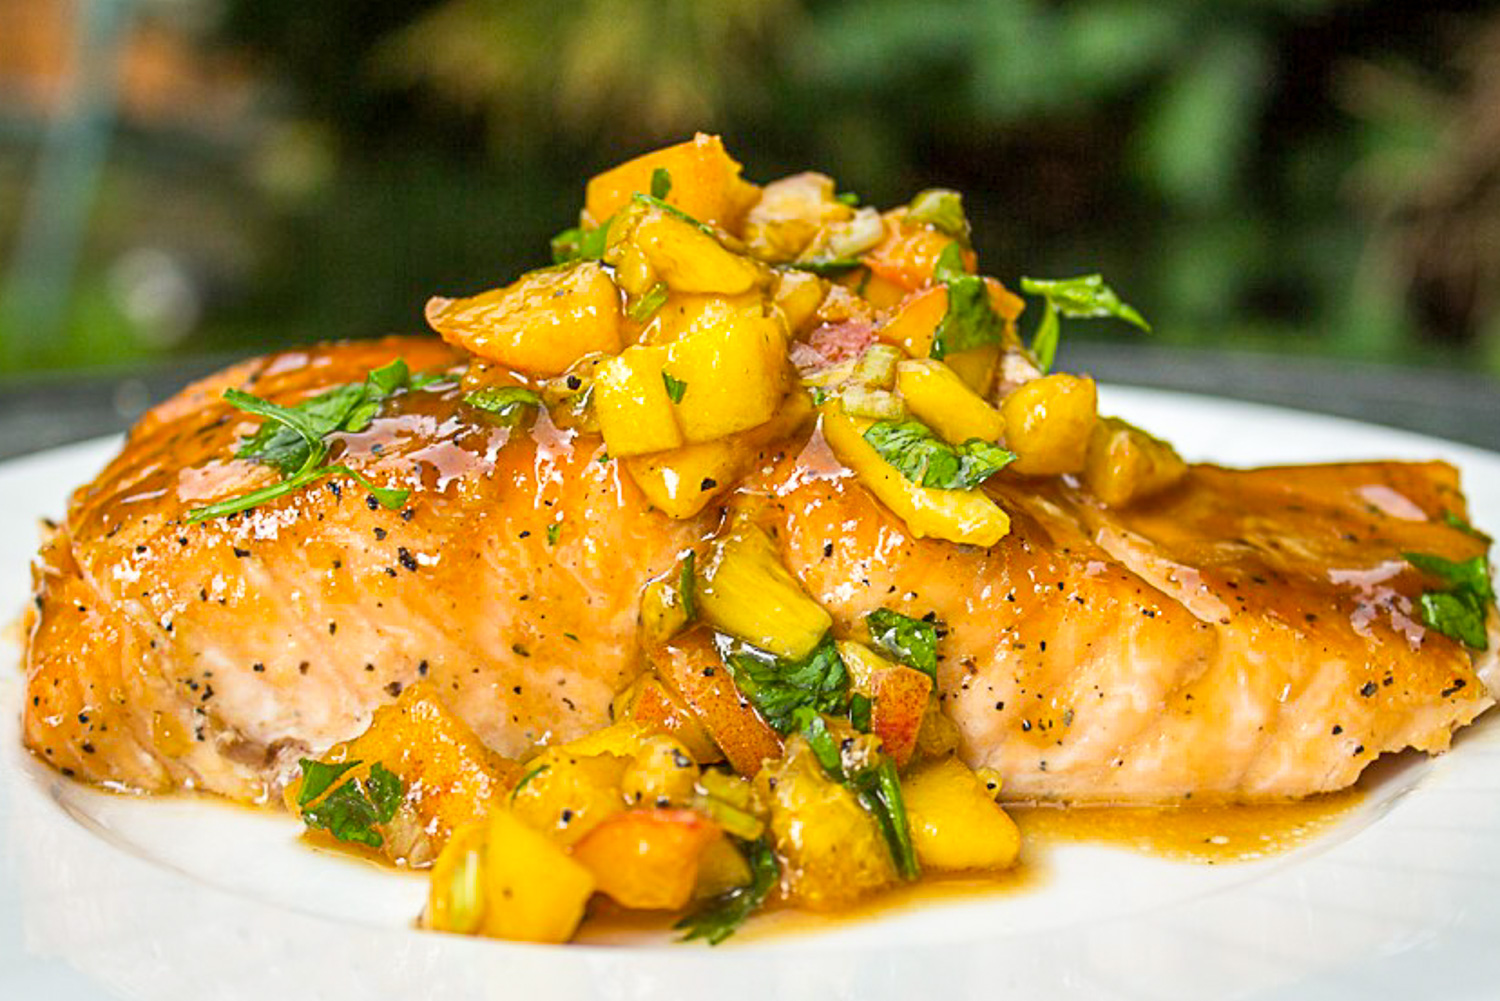 maple ginger salmon with peach salsa on top sitting on plate.